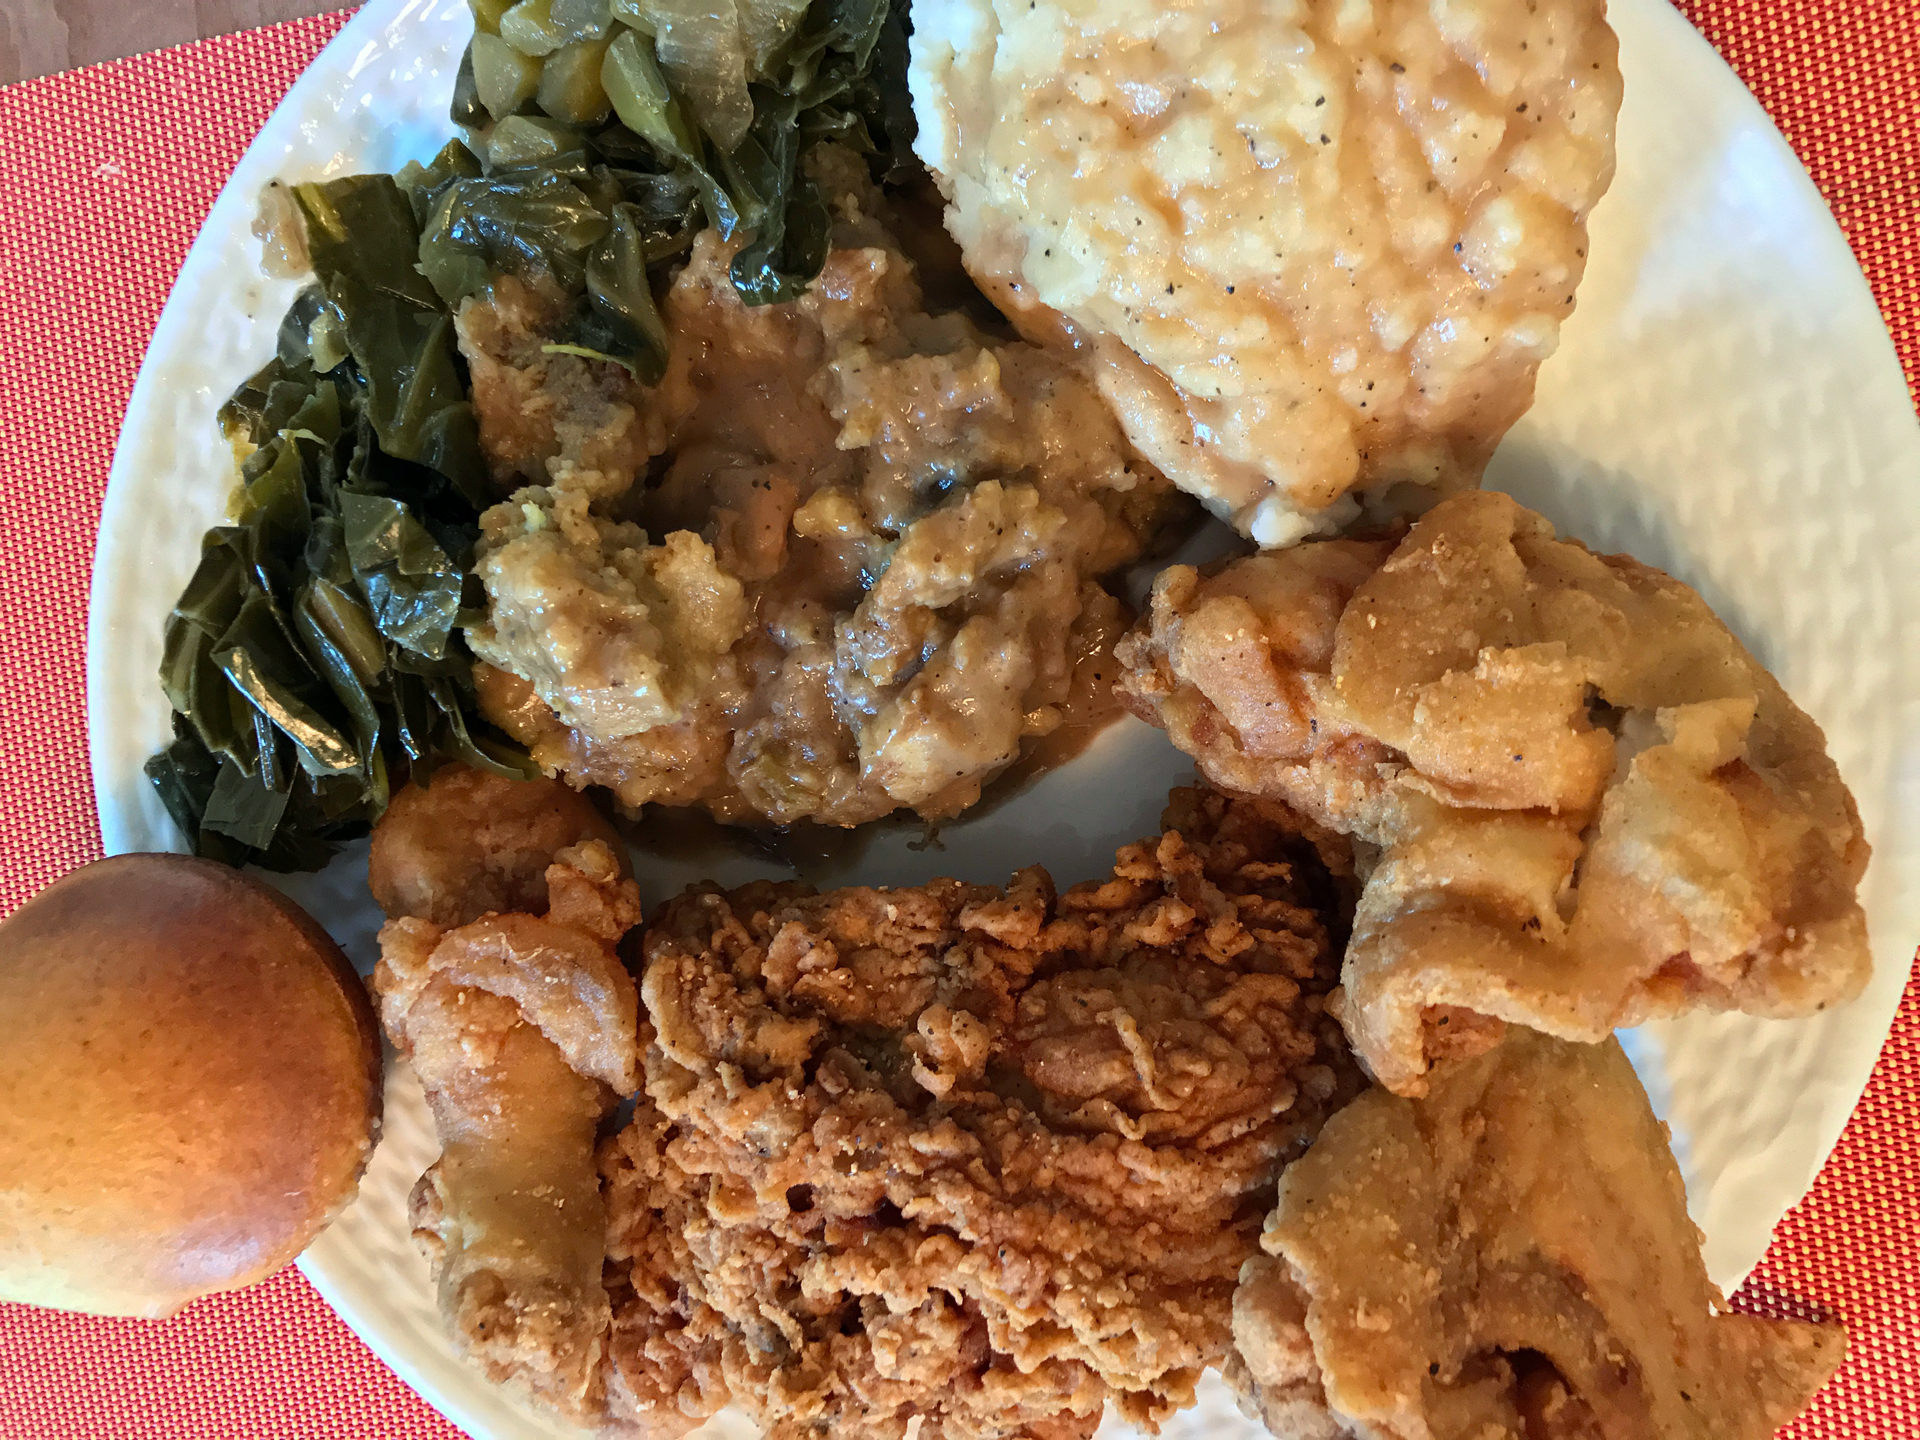 A heaping plate of fried chicken and fixins at Touch of Soul in Oakland.